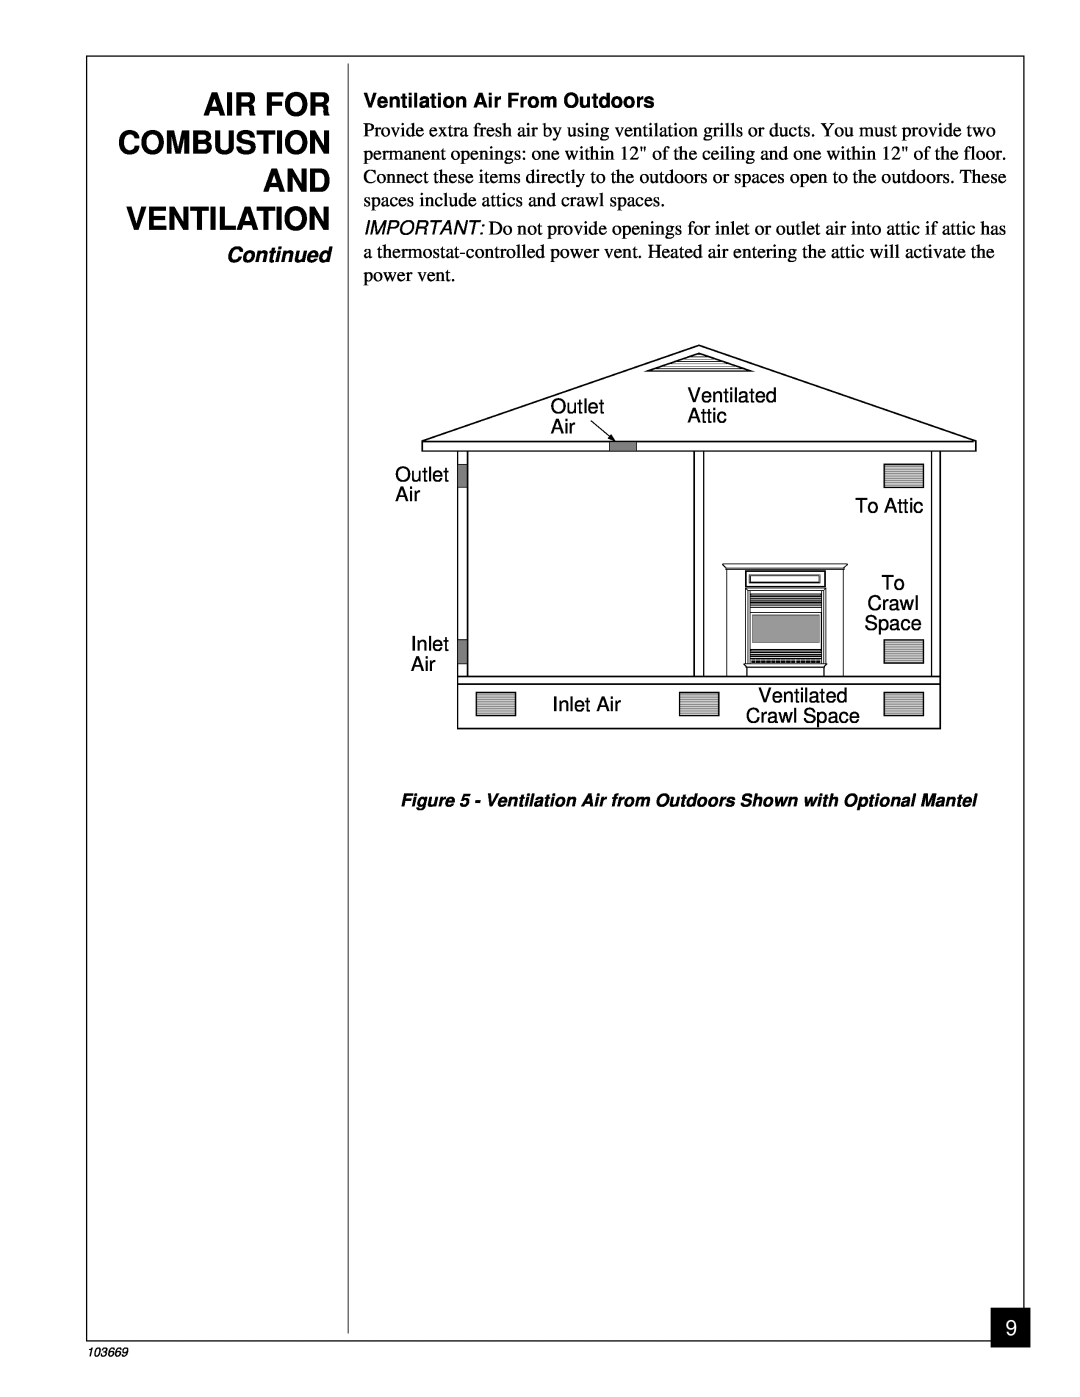 Desa VMH10TP Air For Combustion And Ventilation, Continued, Ventilation Air From Outdoors, Ventilated Outlet Attic Air 